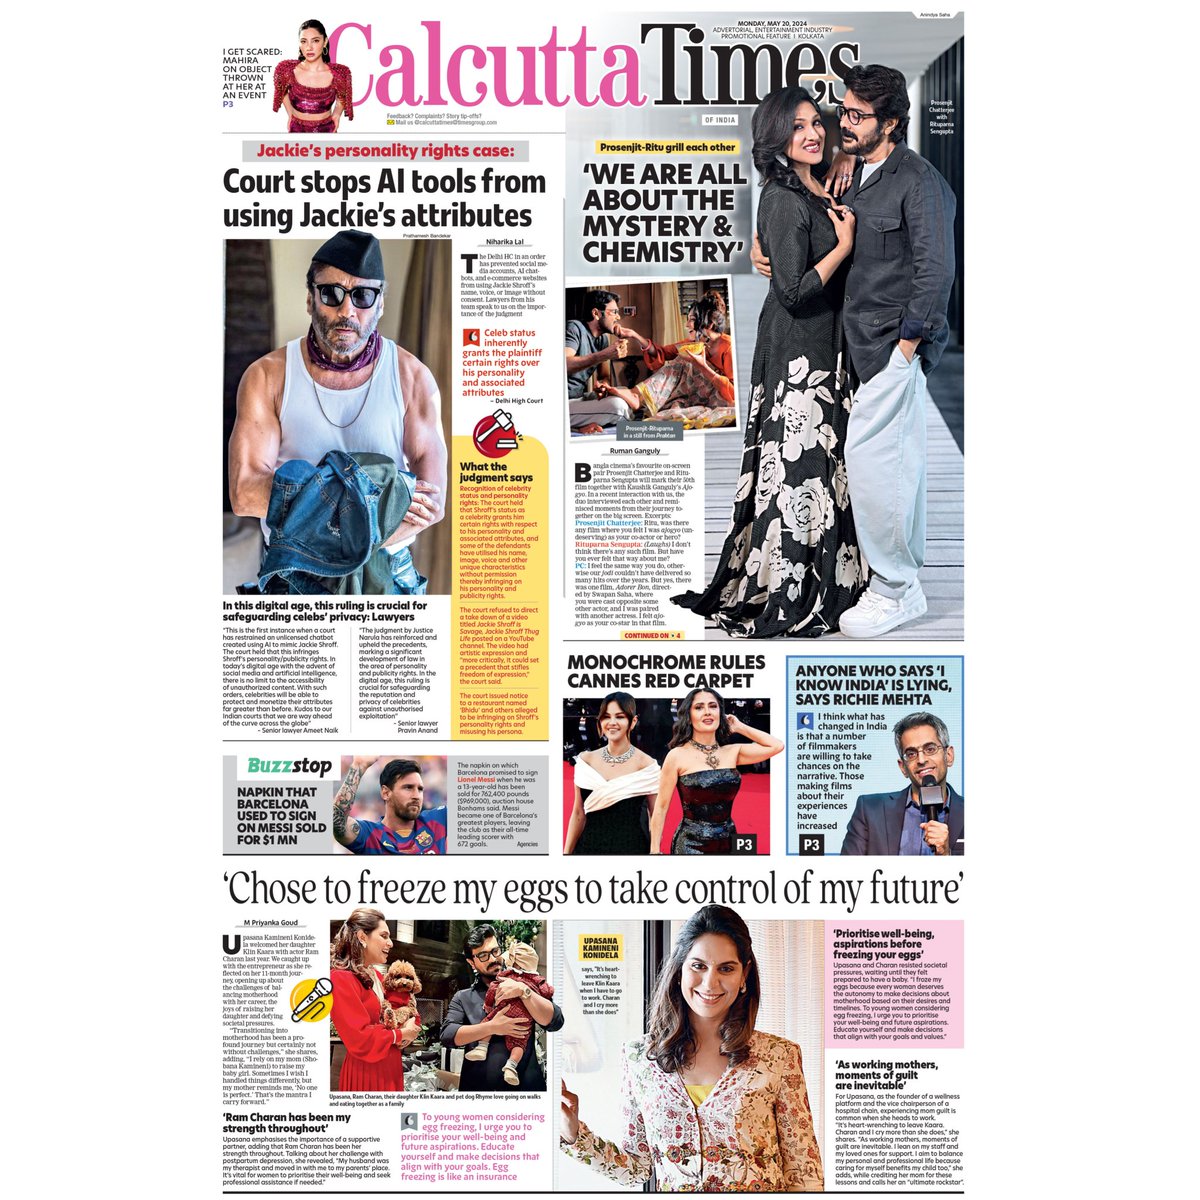 In today's Calcutta Times: Court stops AI tools from using Jackie's attributes, An exclusive interview with Prosenjit Chatterjee and Rituparna Sengupta, and more.. 

#prosenjitchatterjee #rituparnasengupta #exclusiveinterview #calcuttatimes